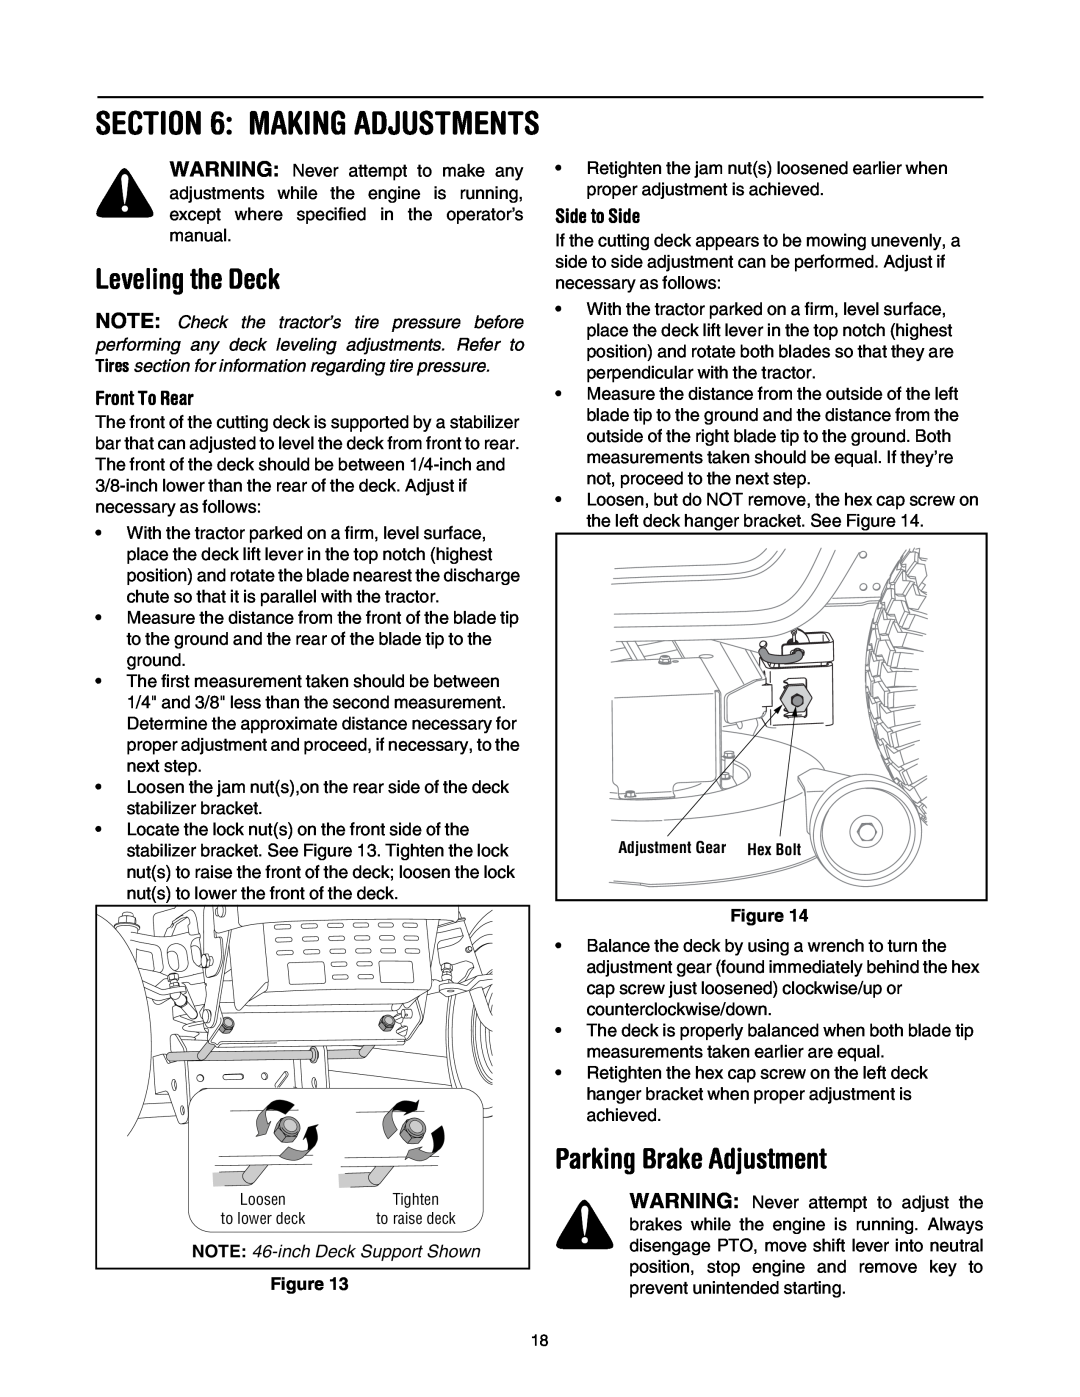 Troy-Bilt Automatic Lawn Tractor manual Making Adjustments, Leveling the Deck, Parking Brake Adjustment, Front To Rear 